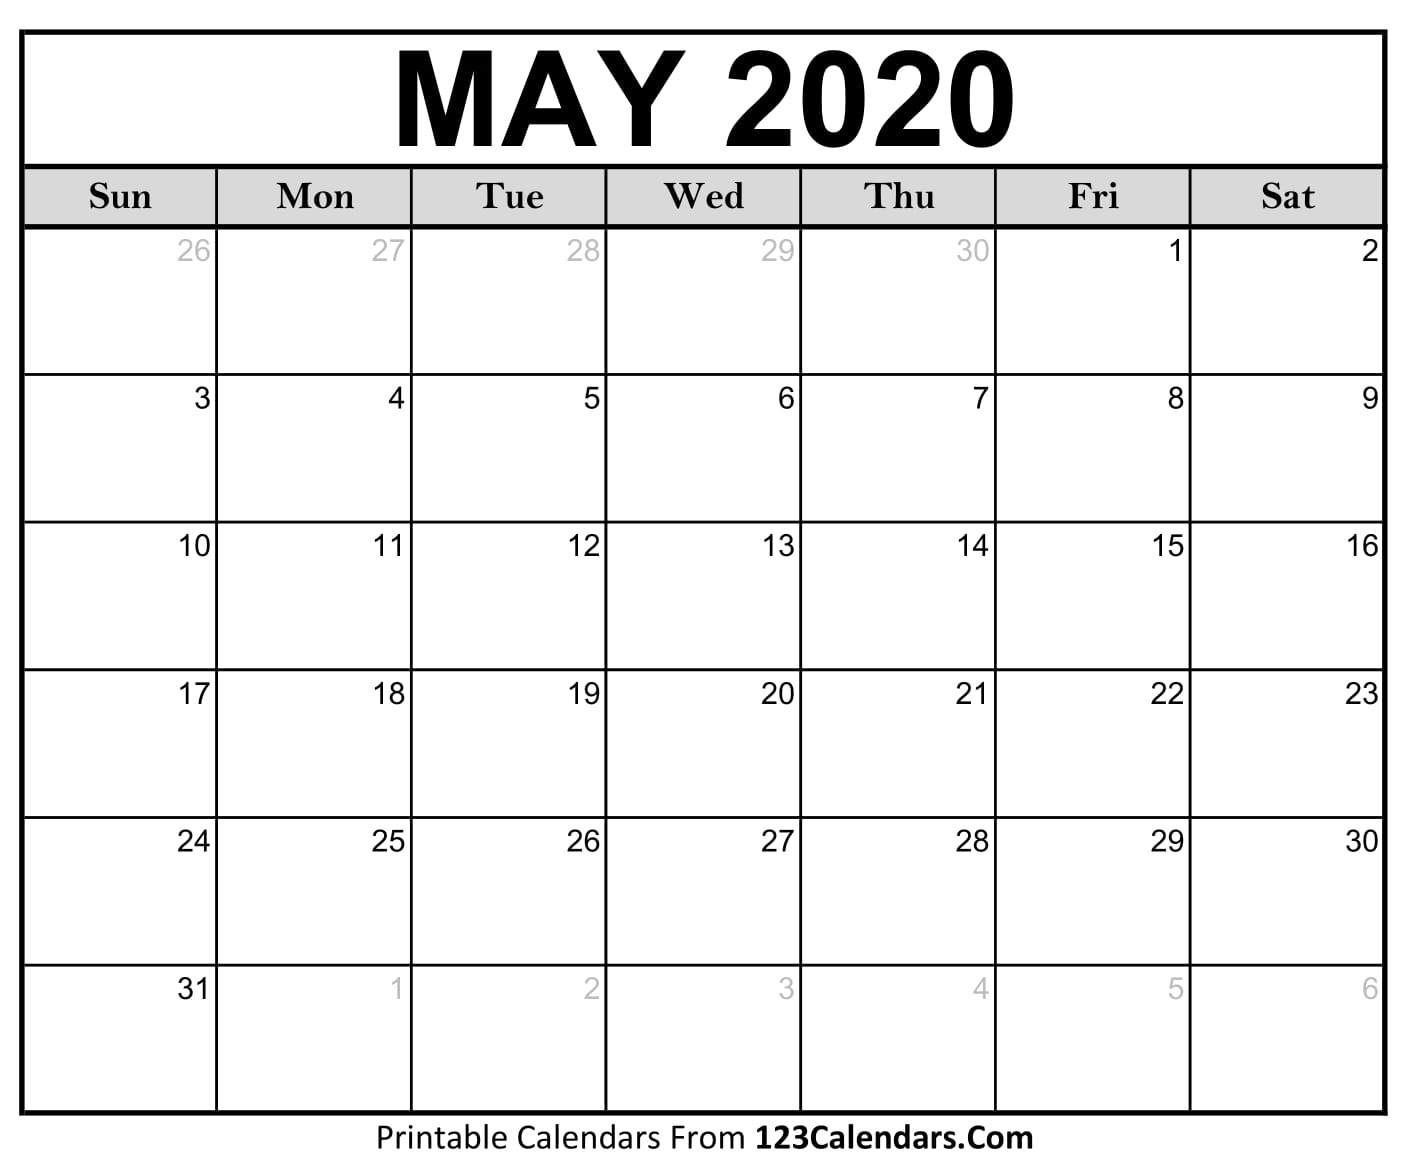 May 2020 Printable Calendar | 123Calendars-2020 Monthly Calendar Printable Showing Previous Month And Next Month